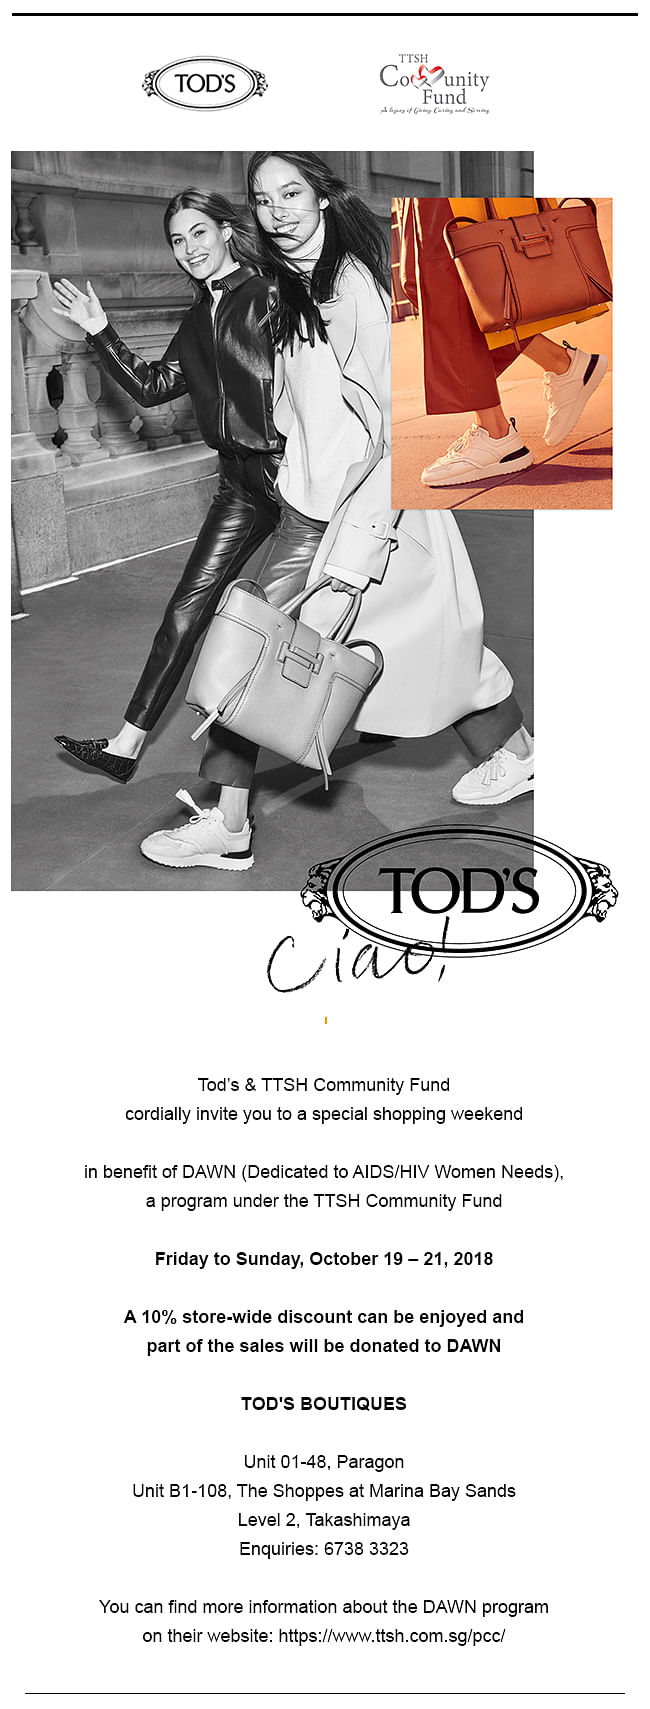 tods charity event